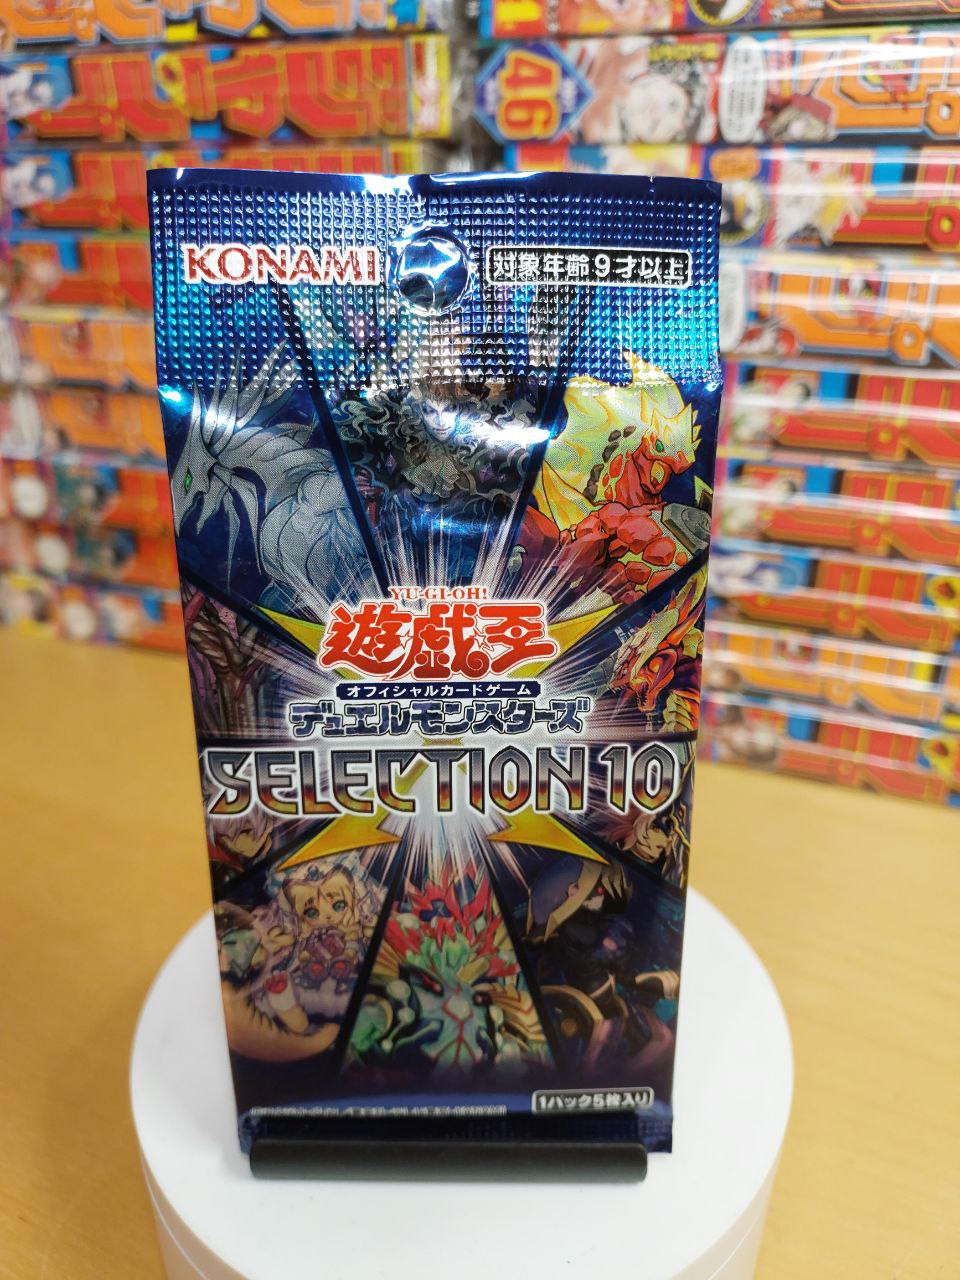 Yu-Gi-Oh! Booster Pack - Selection 10